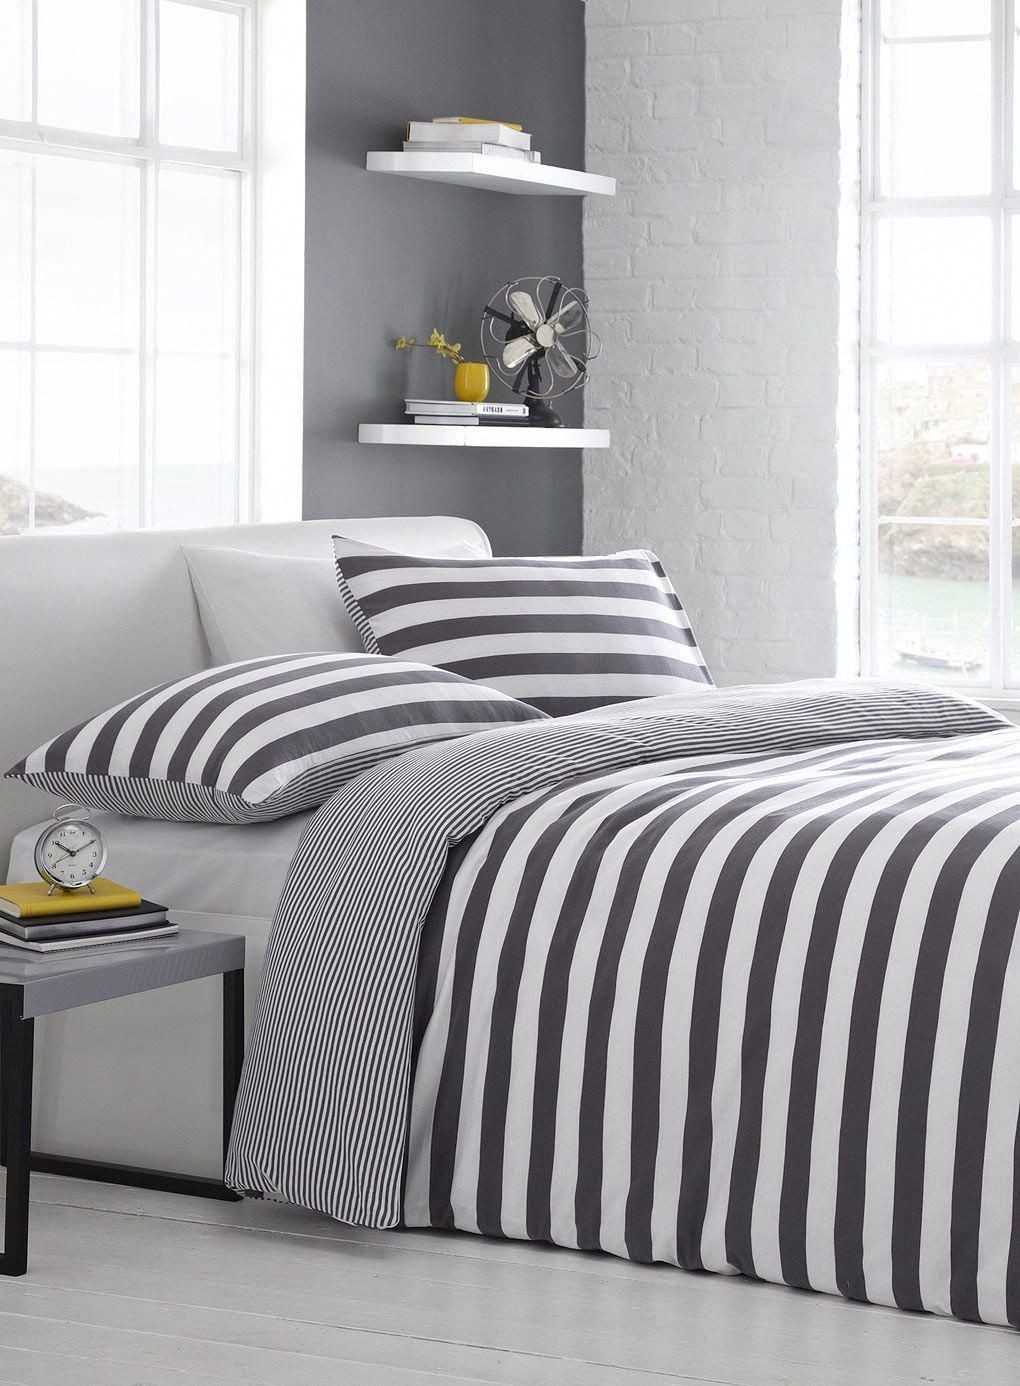 Black and white striped bedding 6